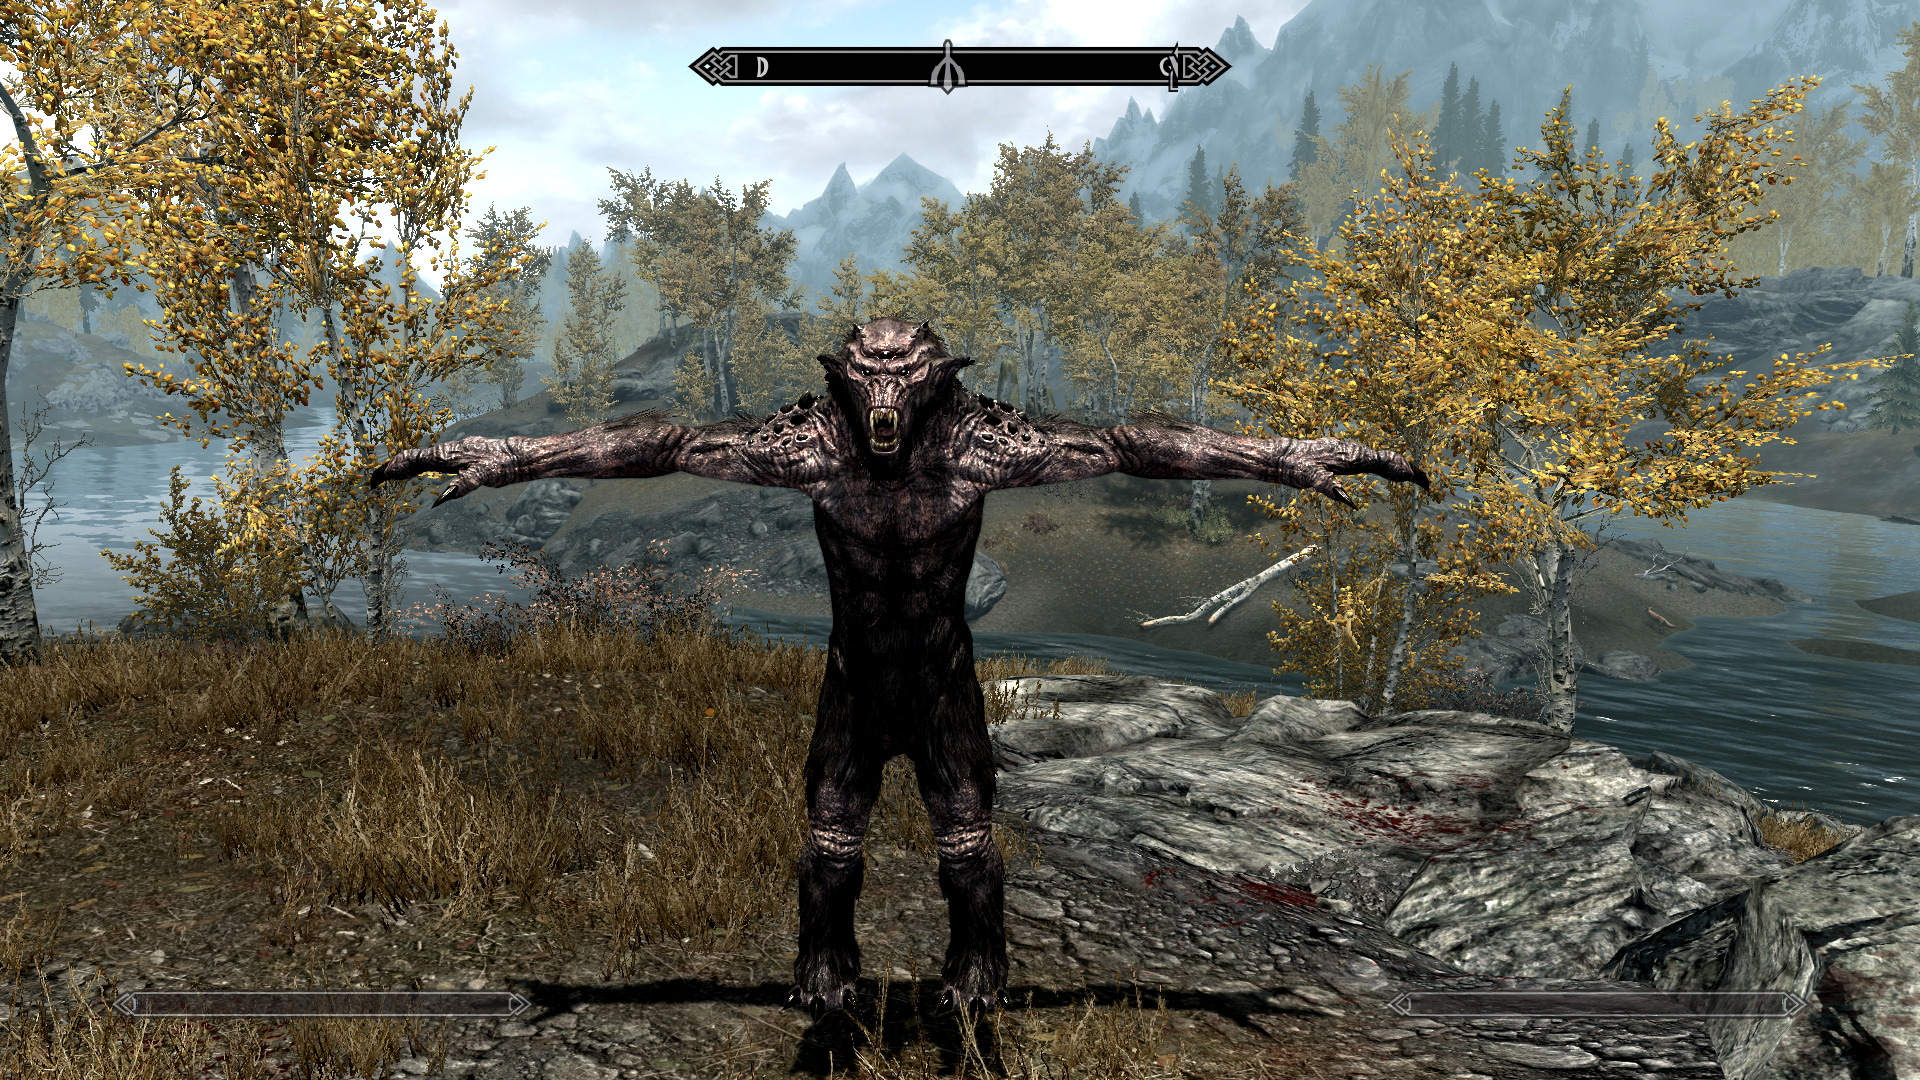 Some animals did t-pose - Technical Support - Skyrim: Special Edition -  LoversLab